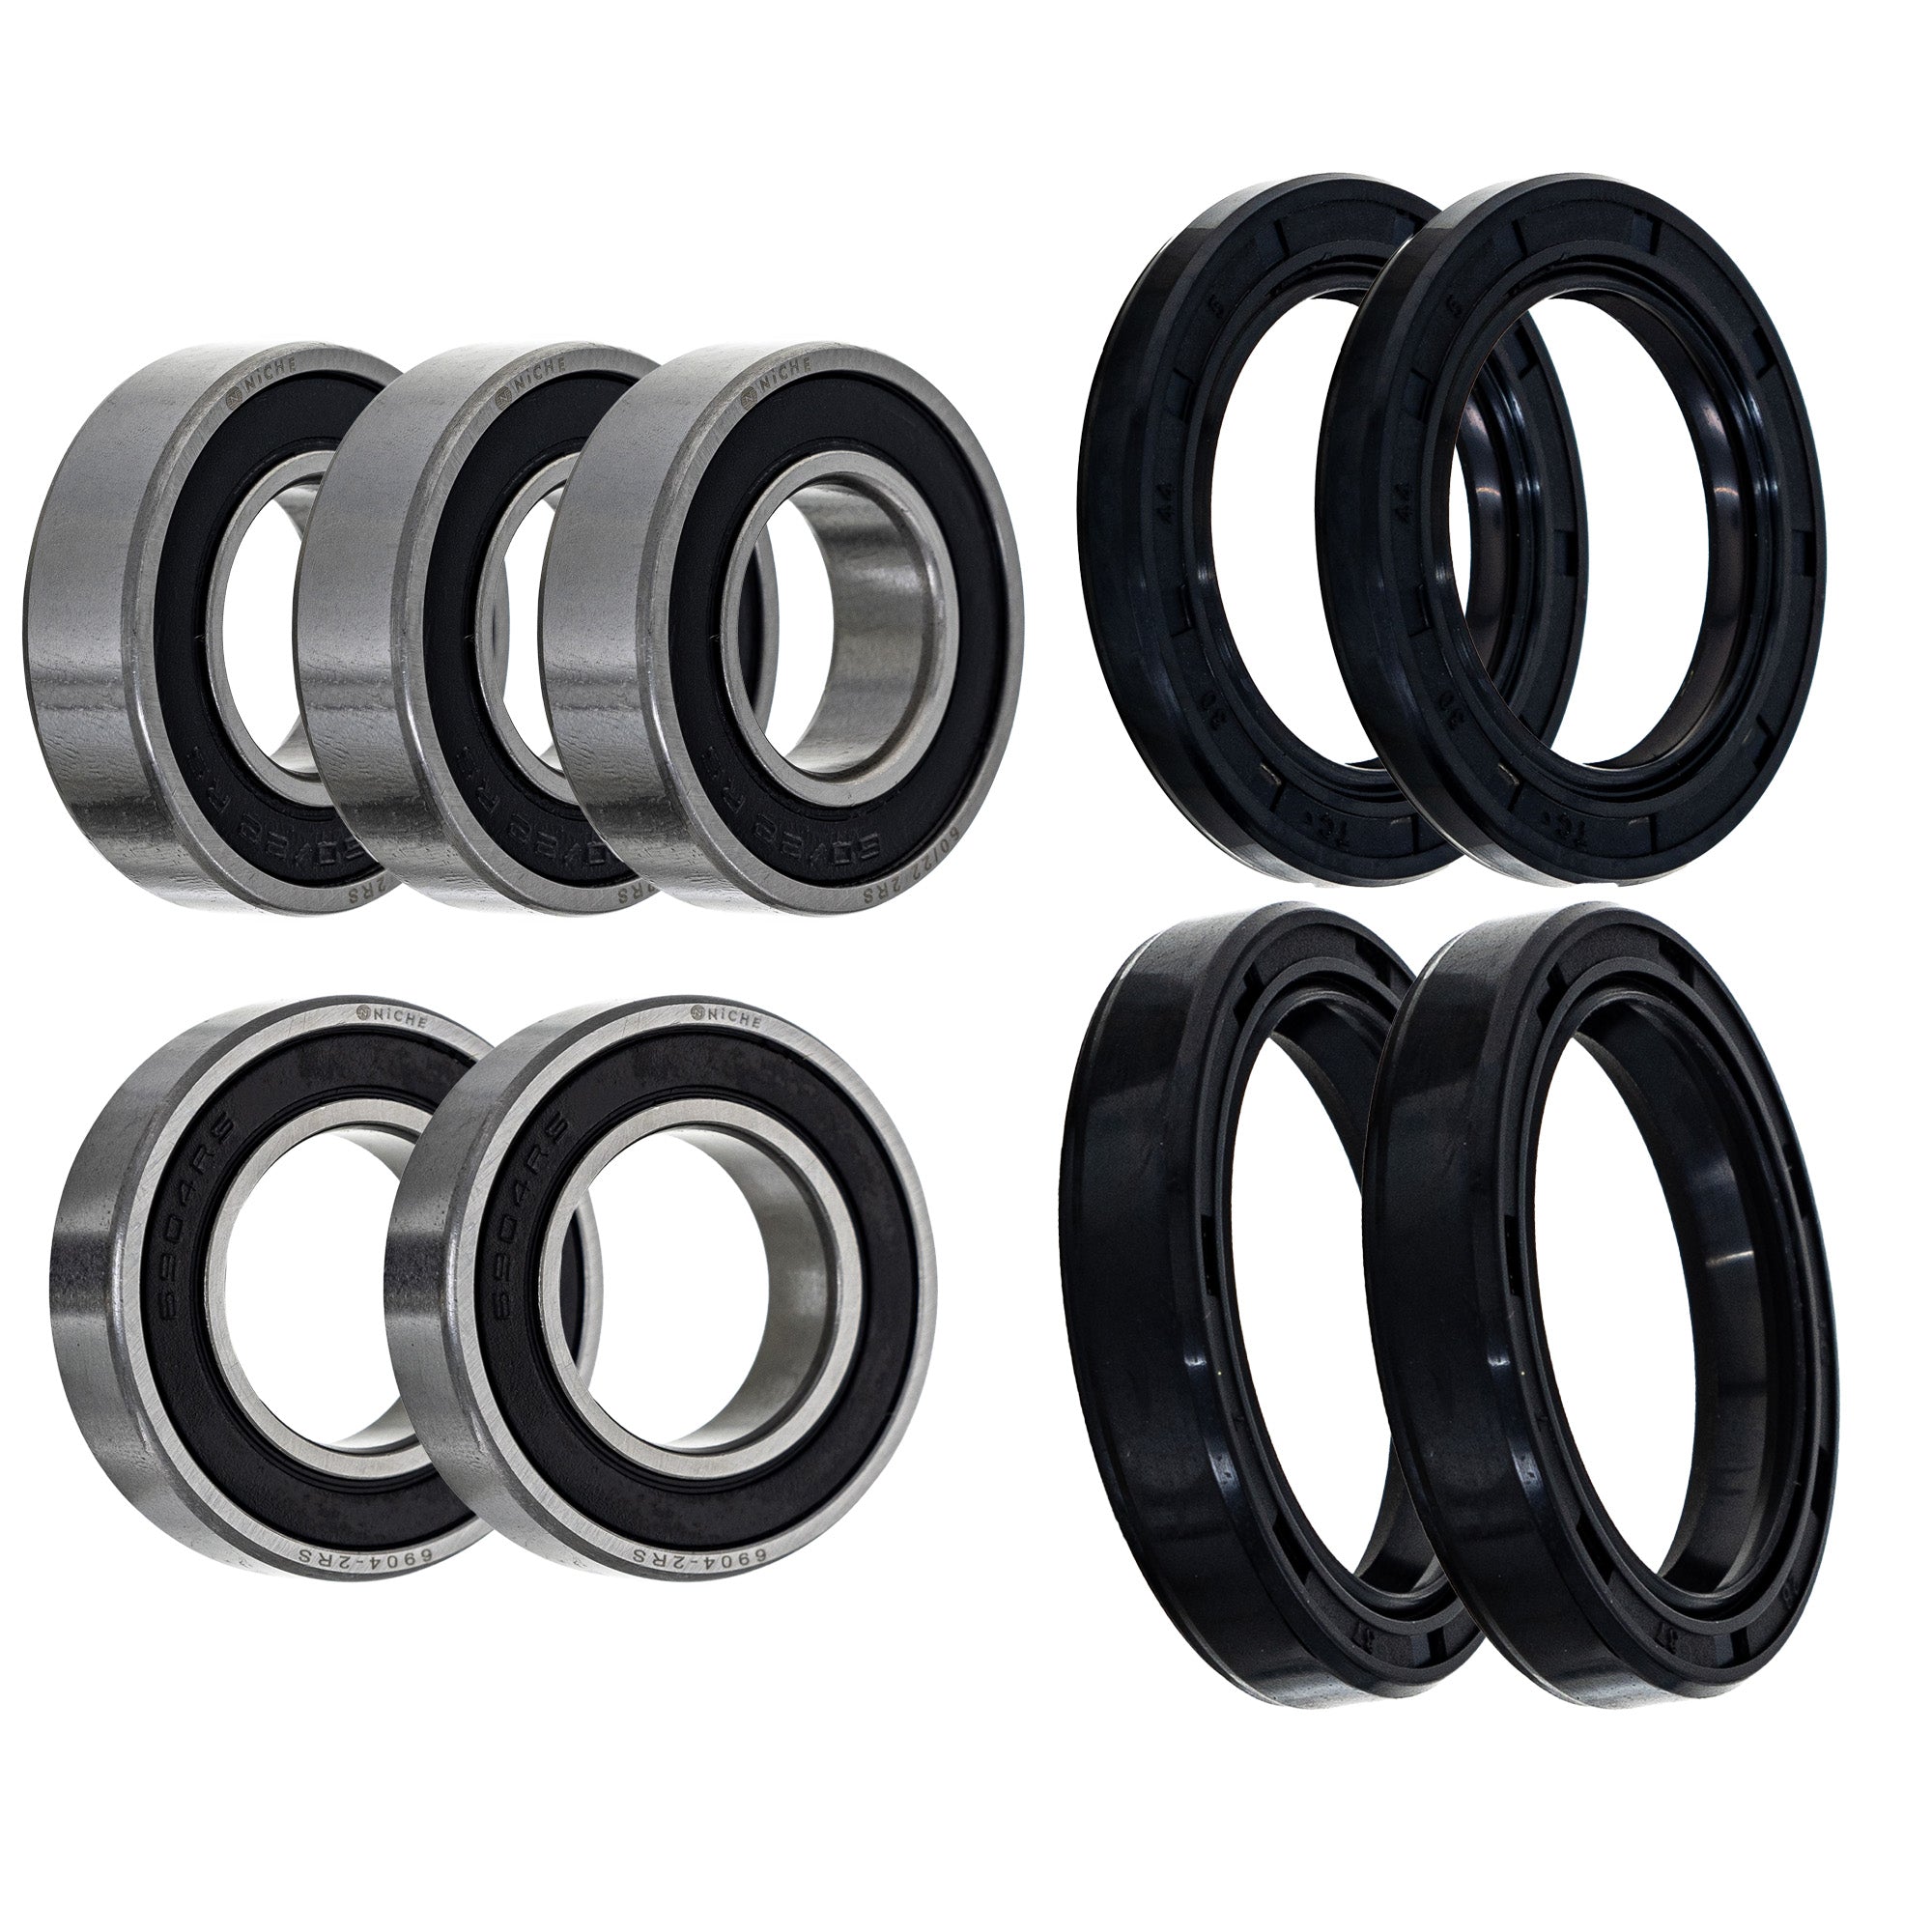 Wheel Bearing Seal Kit for zOTHER RM250 RM125 NICHE MK1008745